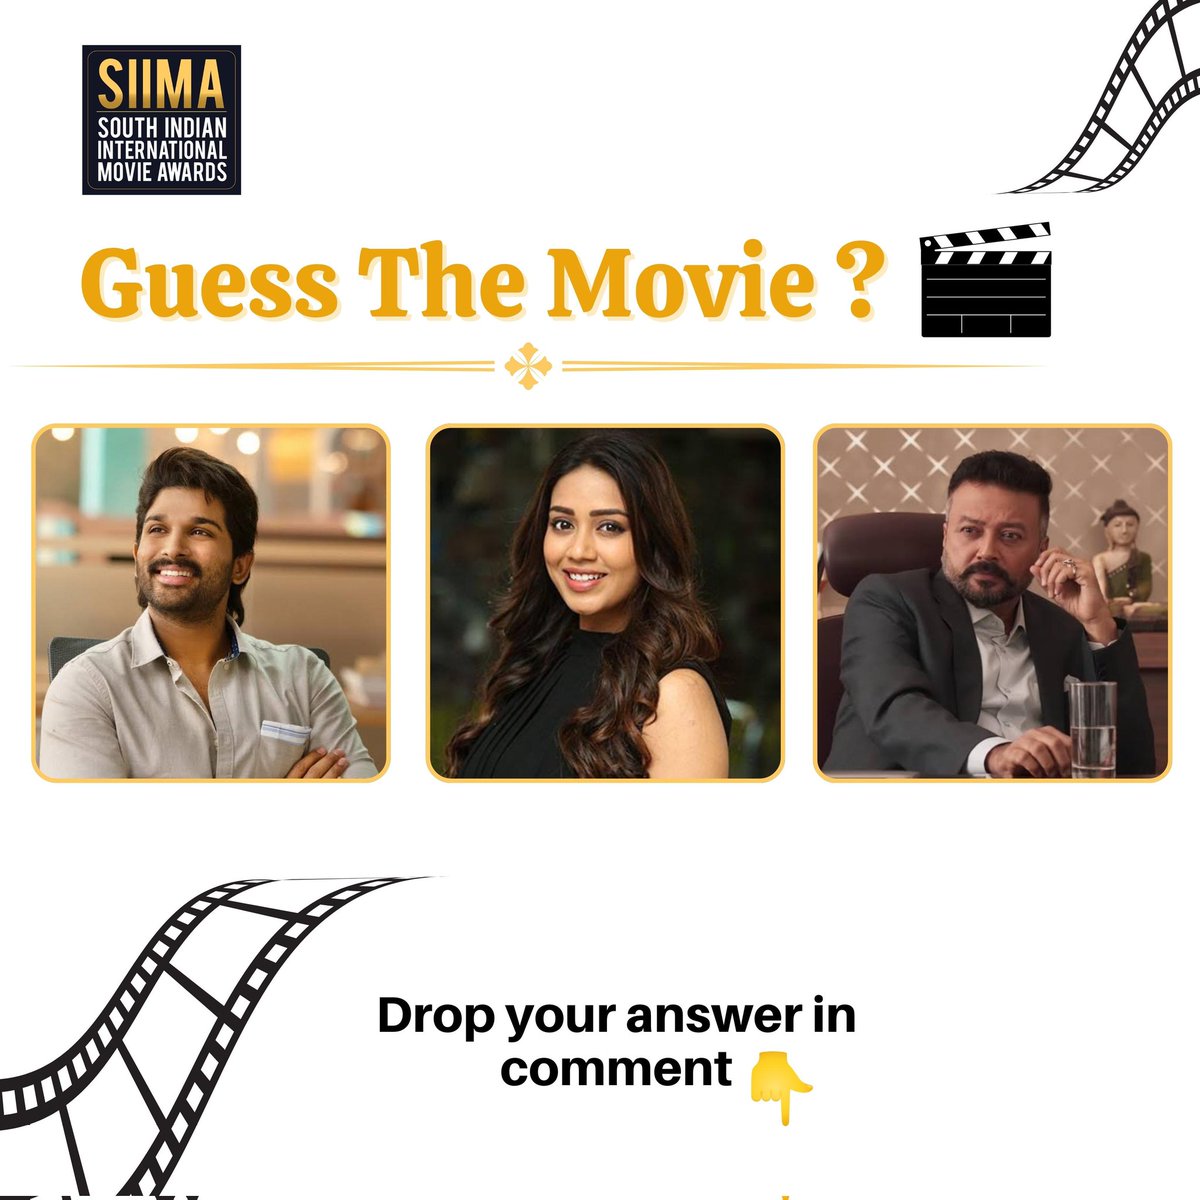 Guess the movie?🎬🎥

Drop your answer in the comments .

#guessthemovie #contest #tollywood #filmindustry #alluarjun #nivethapethuraj #jayaram #siima